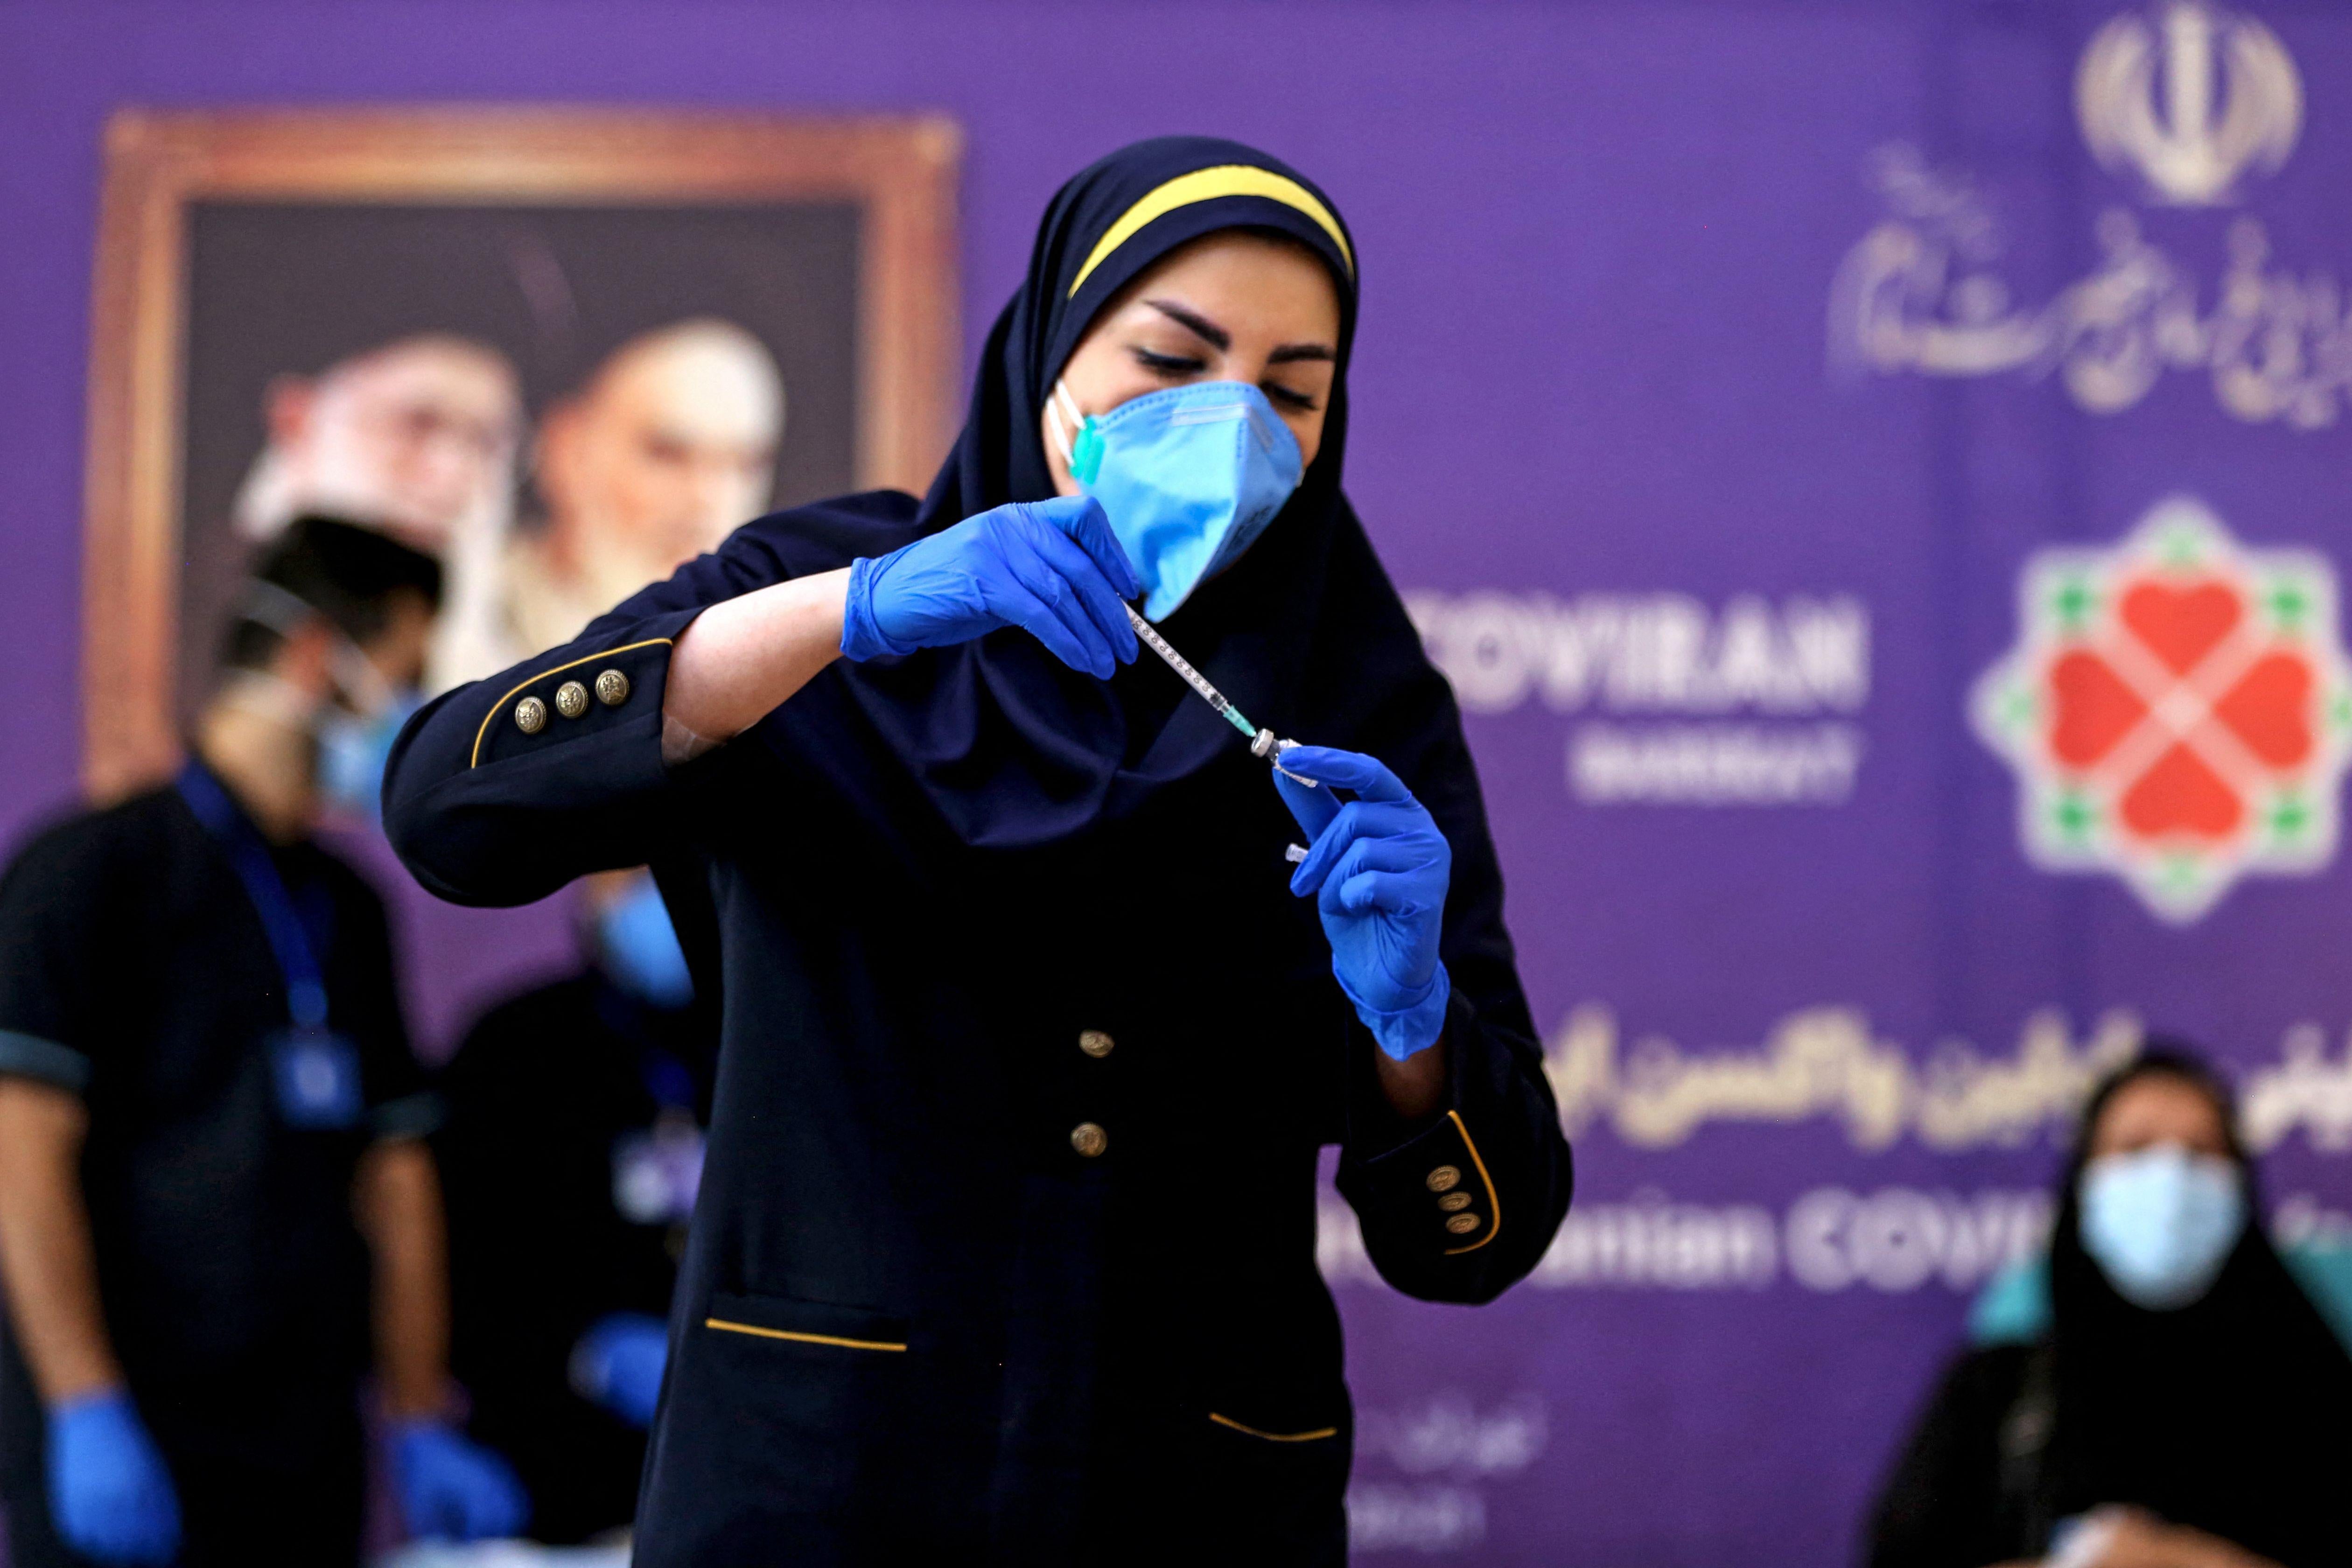 A woman wearing a headscarf, a mask, and gloves puts a syringe in a vial.